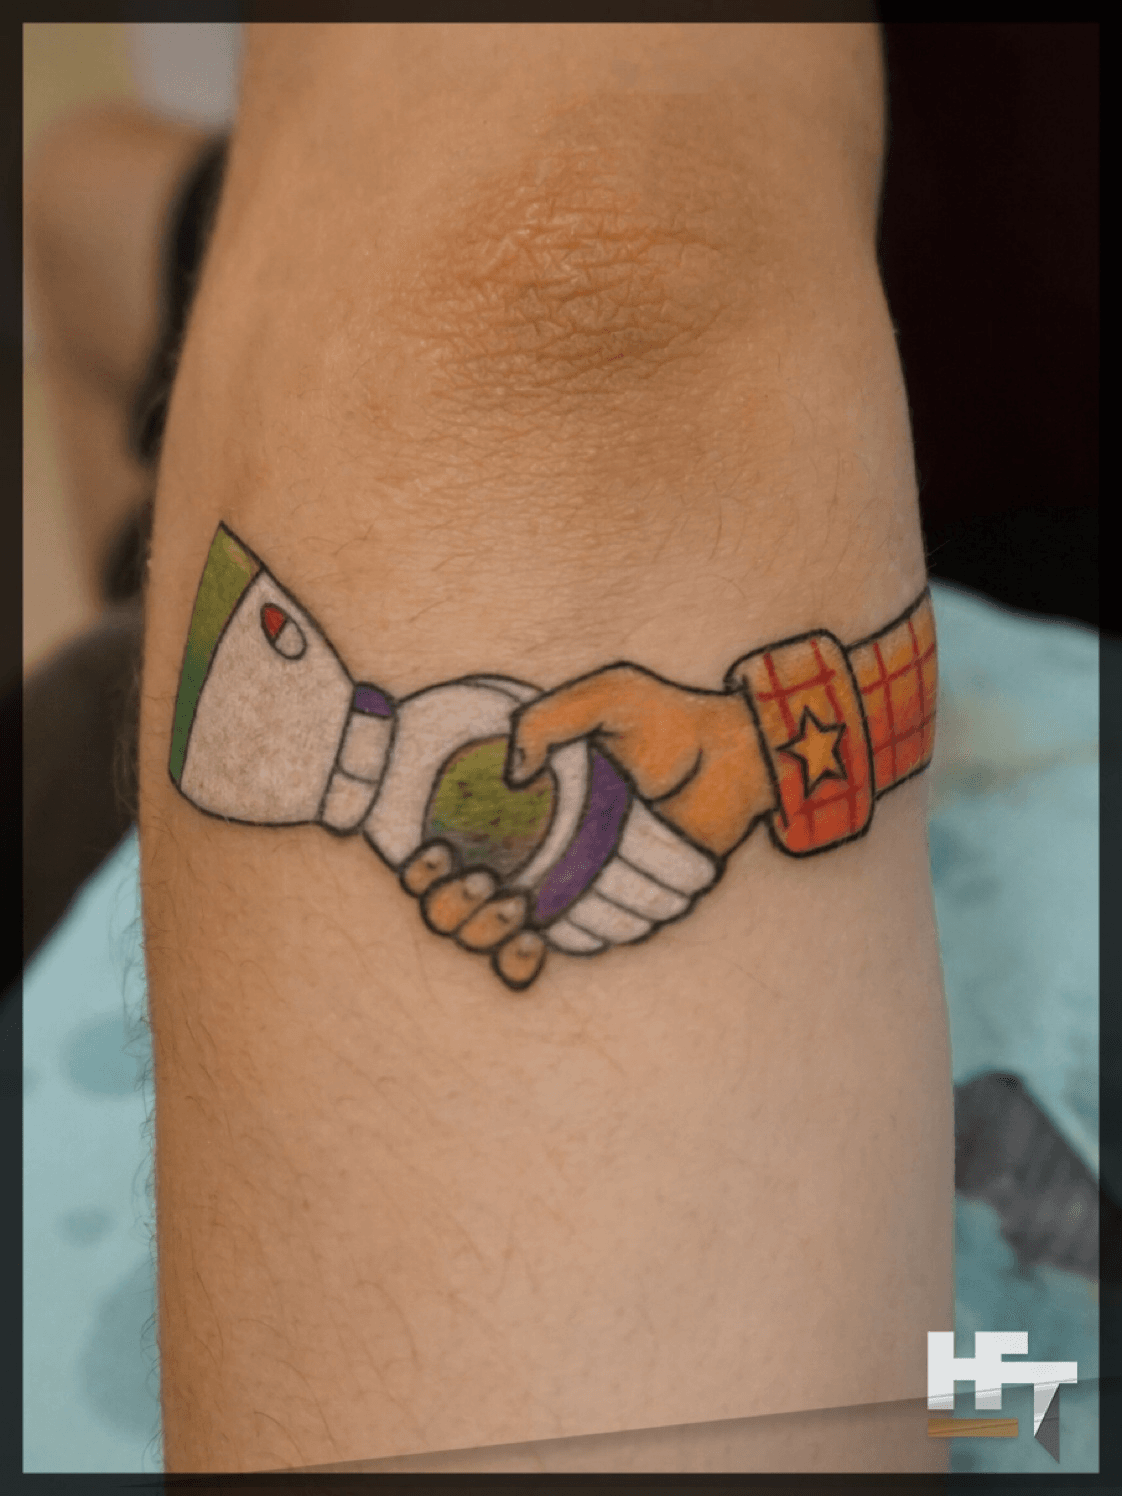 14 Magical Toy Story Tattoos Thatll Get Fans Amped For The 4th Movie   CafeMomcom